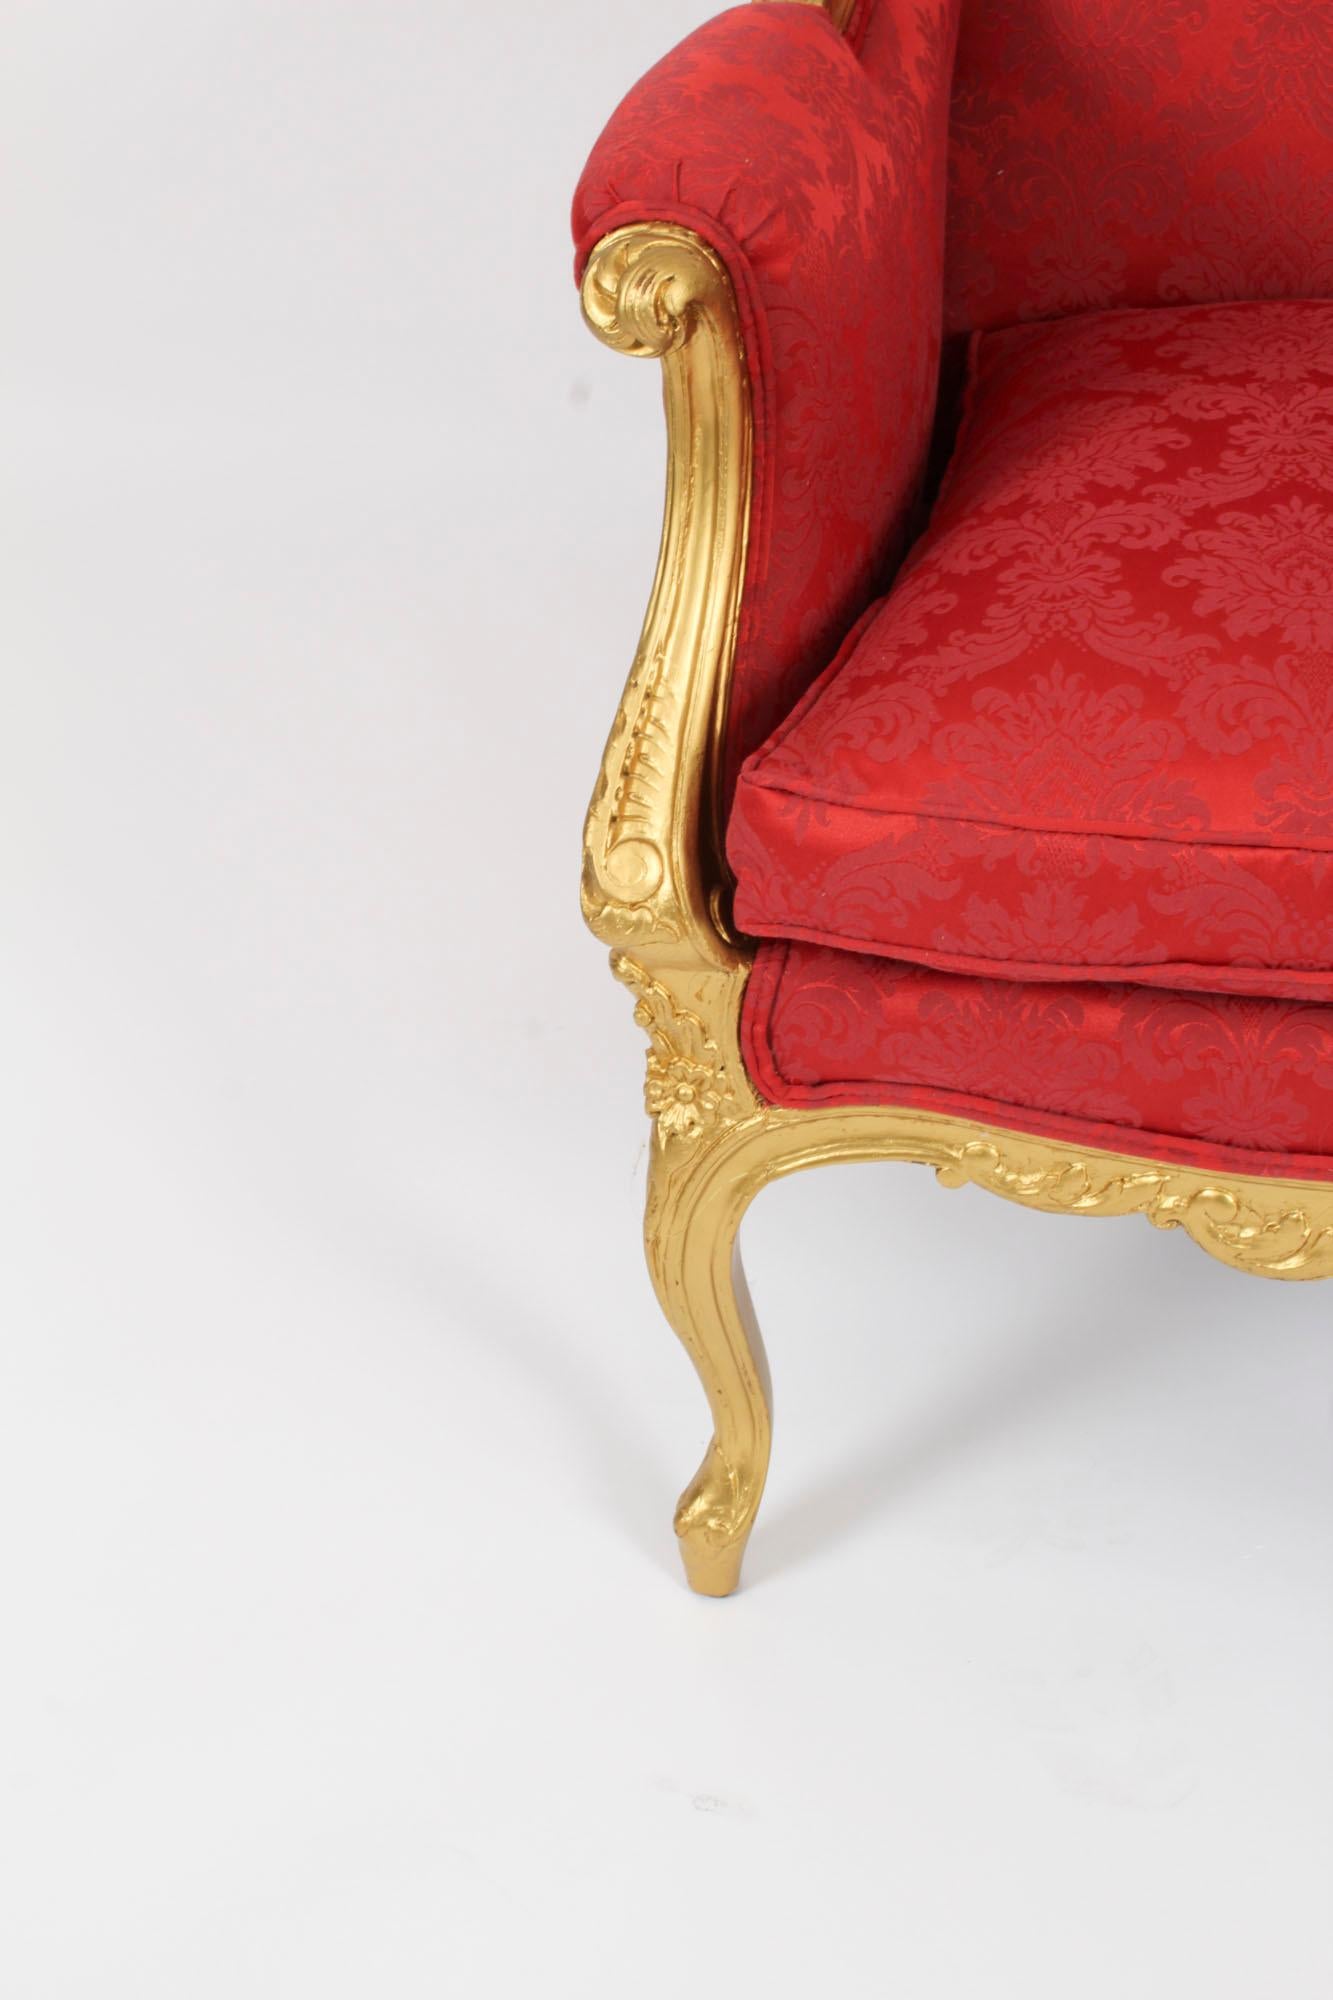 Antique Louis XV Revival Giltwood Shaped Bergere Armchair, 19th Century For Sale 2